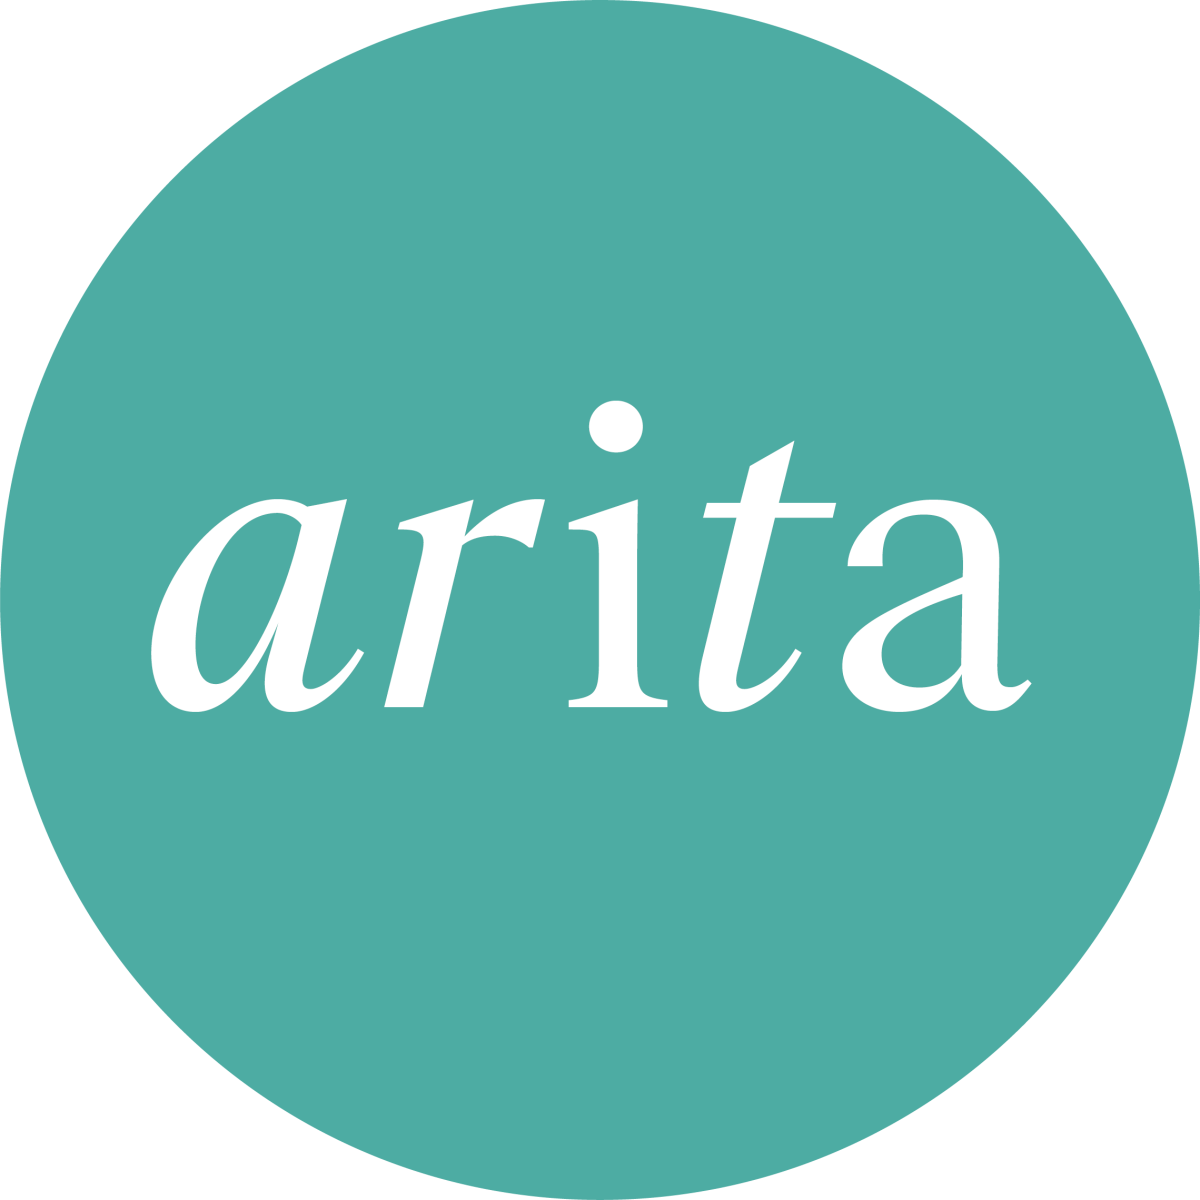 Association for Rights in the Arts (ARITA)